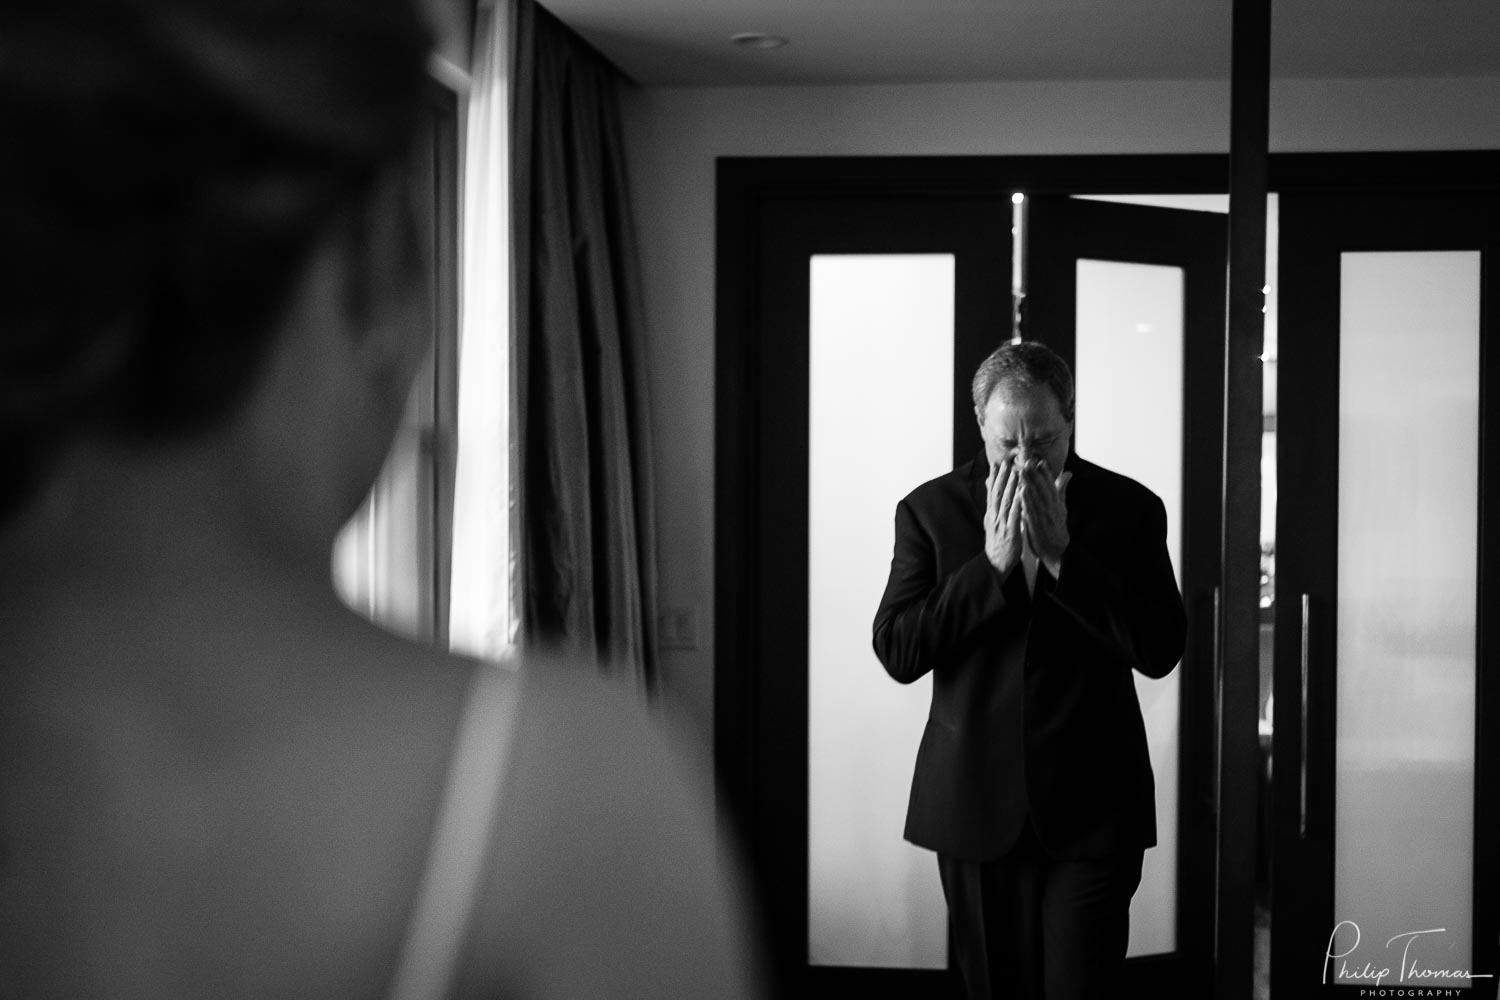 Father of the bride reacts with emotion seeing his daughter in her wedding dress - The JW Marriott Downtown Houston bride and groom get ready -Philip Thomas Photography